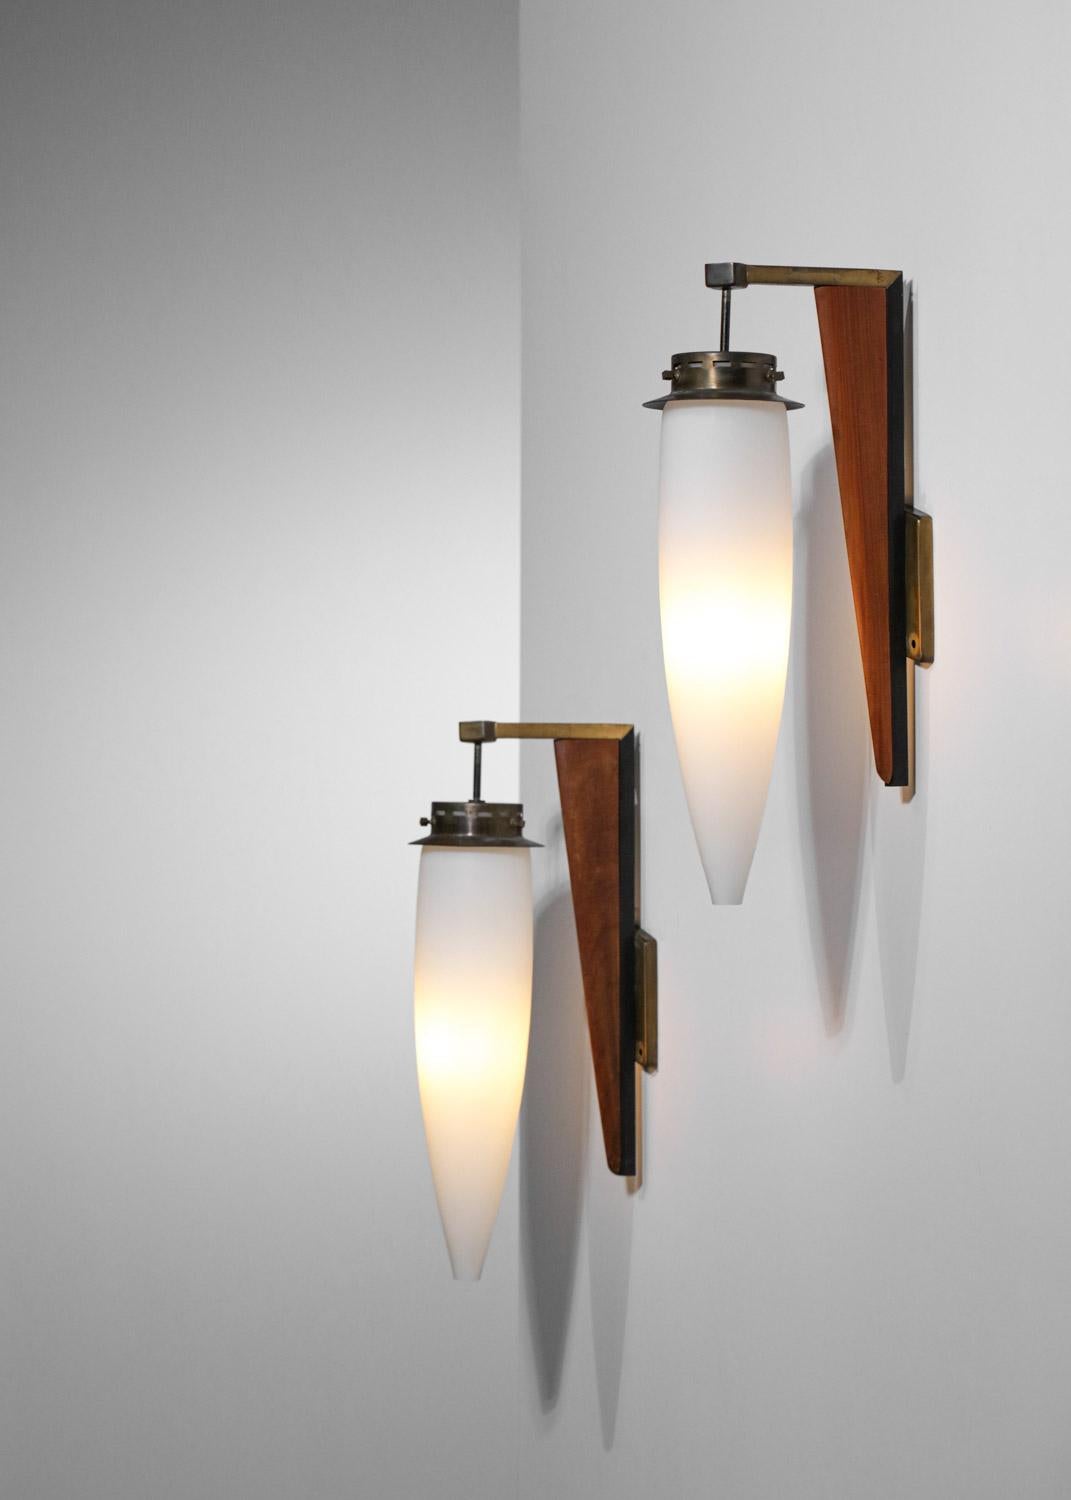 Pair of vintage Italian sconces published by Stilnovo in the 50s. Structure of the sconces in solid teak and brass, diffusers in white opaque opaline. Sober and elegant design approaching the Scandinavian design of the same period. Very nice vintage